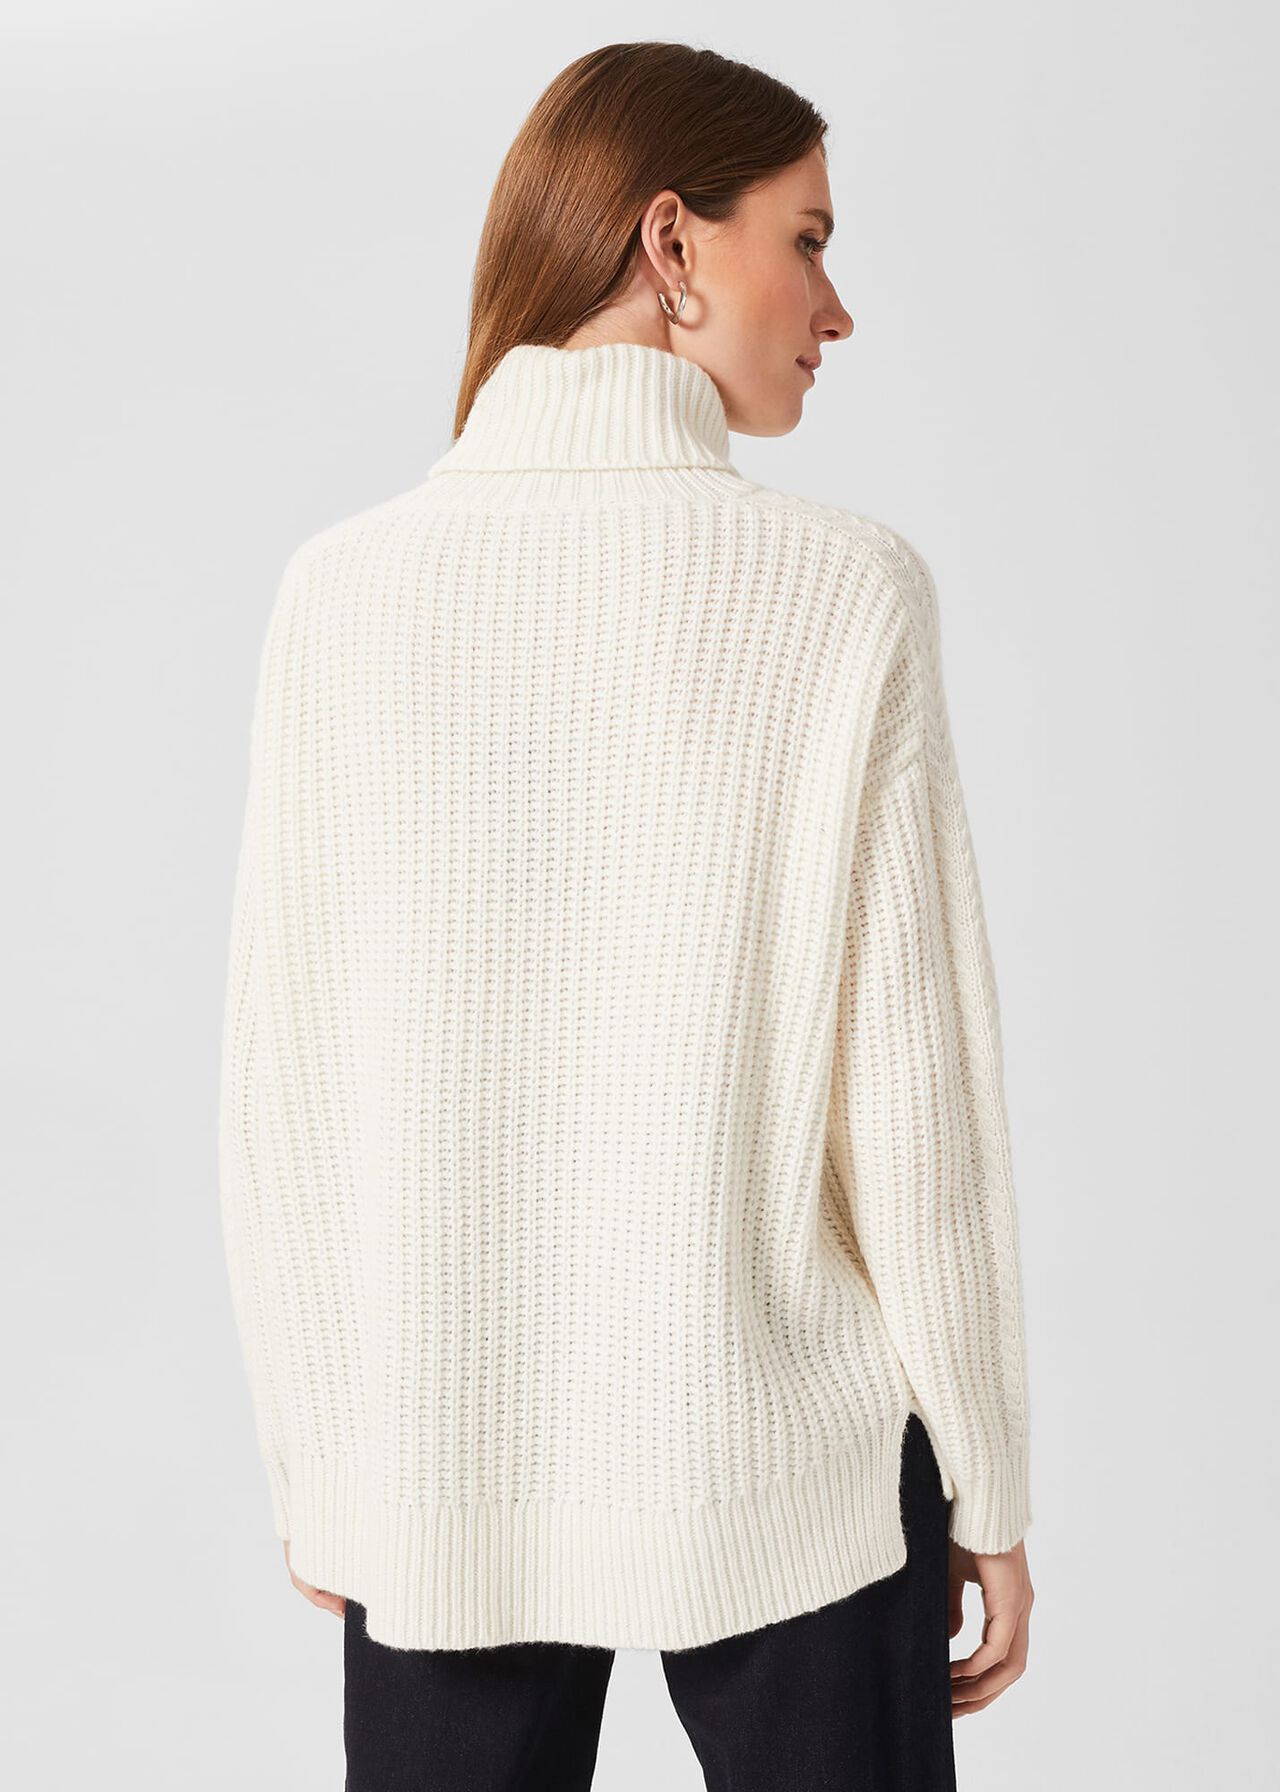 Emmeline Cable Sweater With Alpaca, Ivory, hi-res